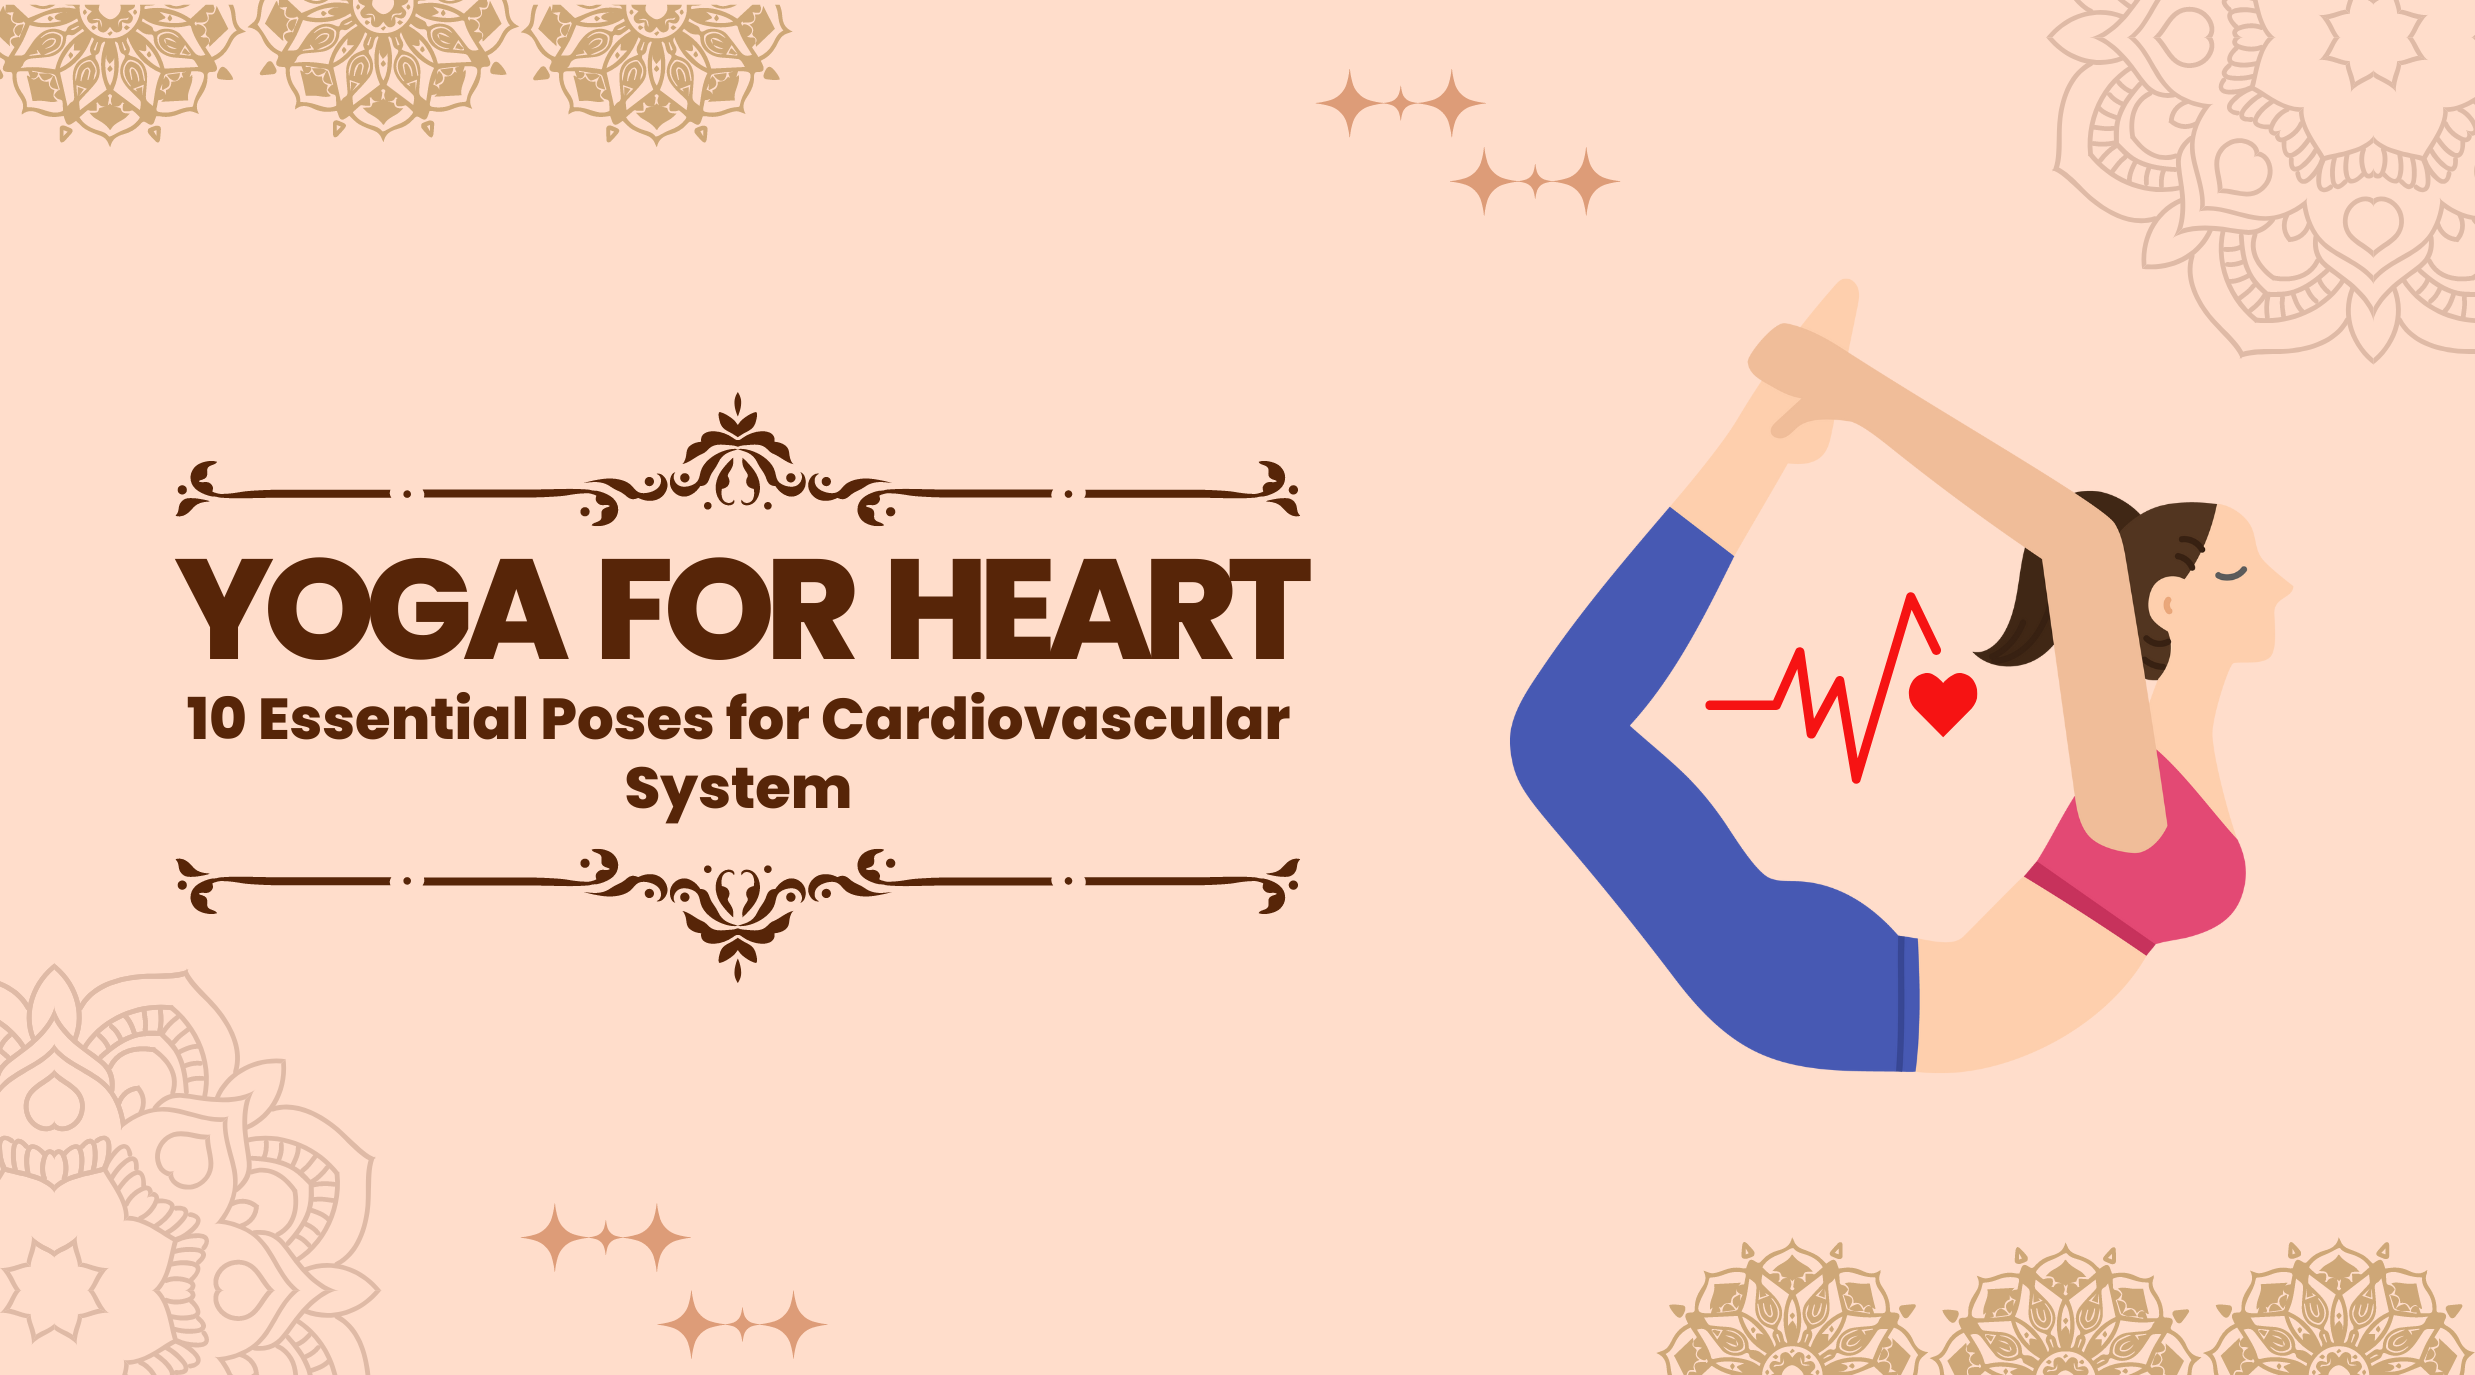 Yoga for Heart: 10 Essential Poses for Cardiovascular System